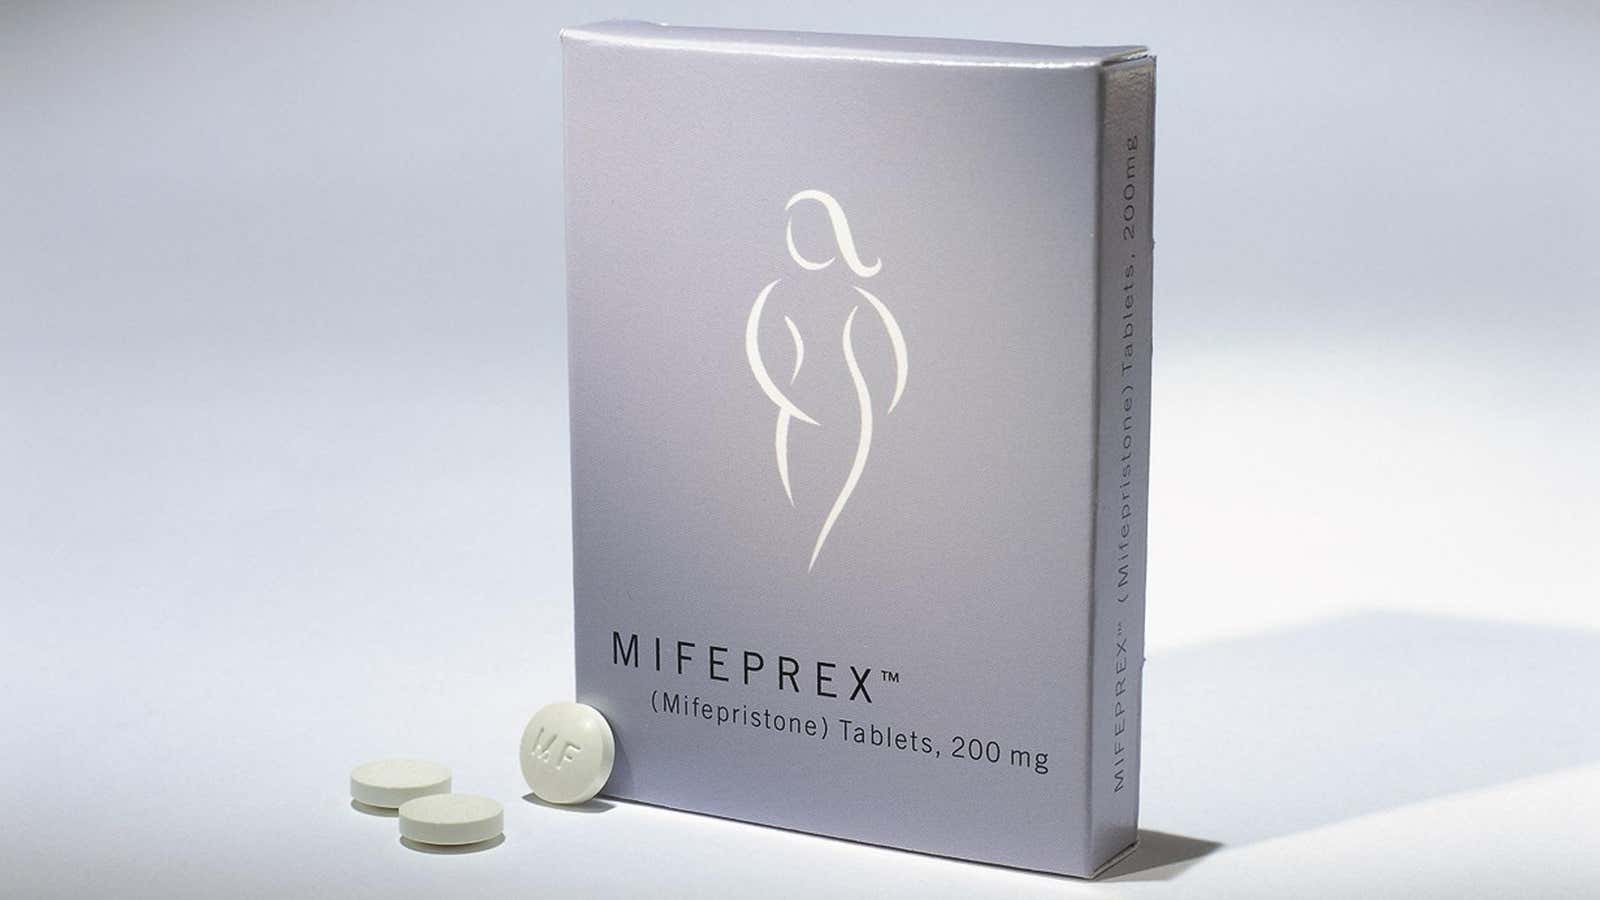 How the US could actually make mifepristone easy to get